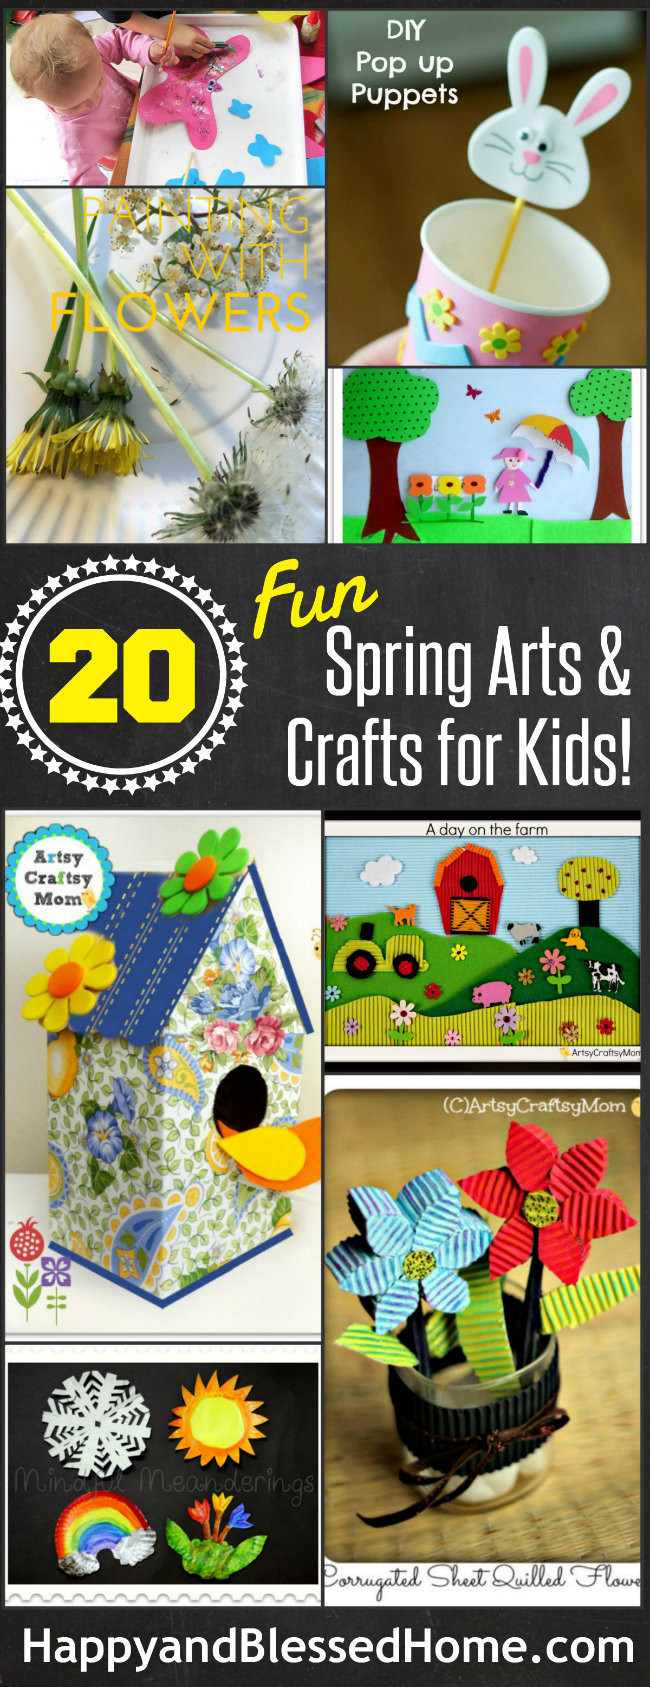 Arts And Crafts Gifts Ideas
 The Ultimate List of 20 Spring Arts and Crafts for Kids